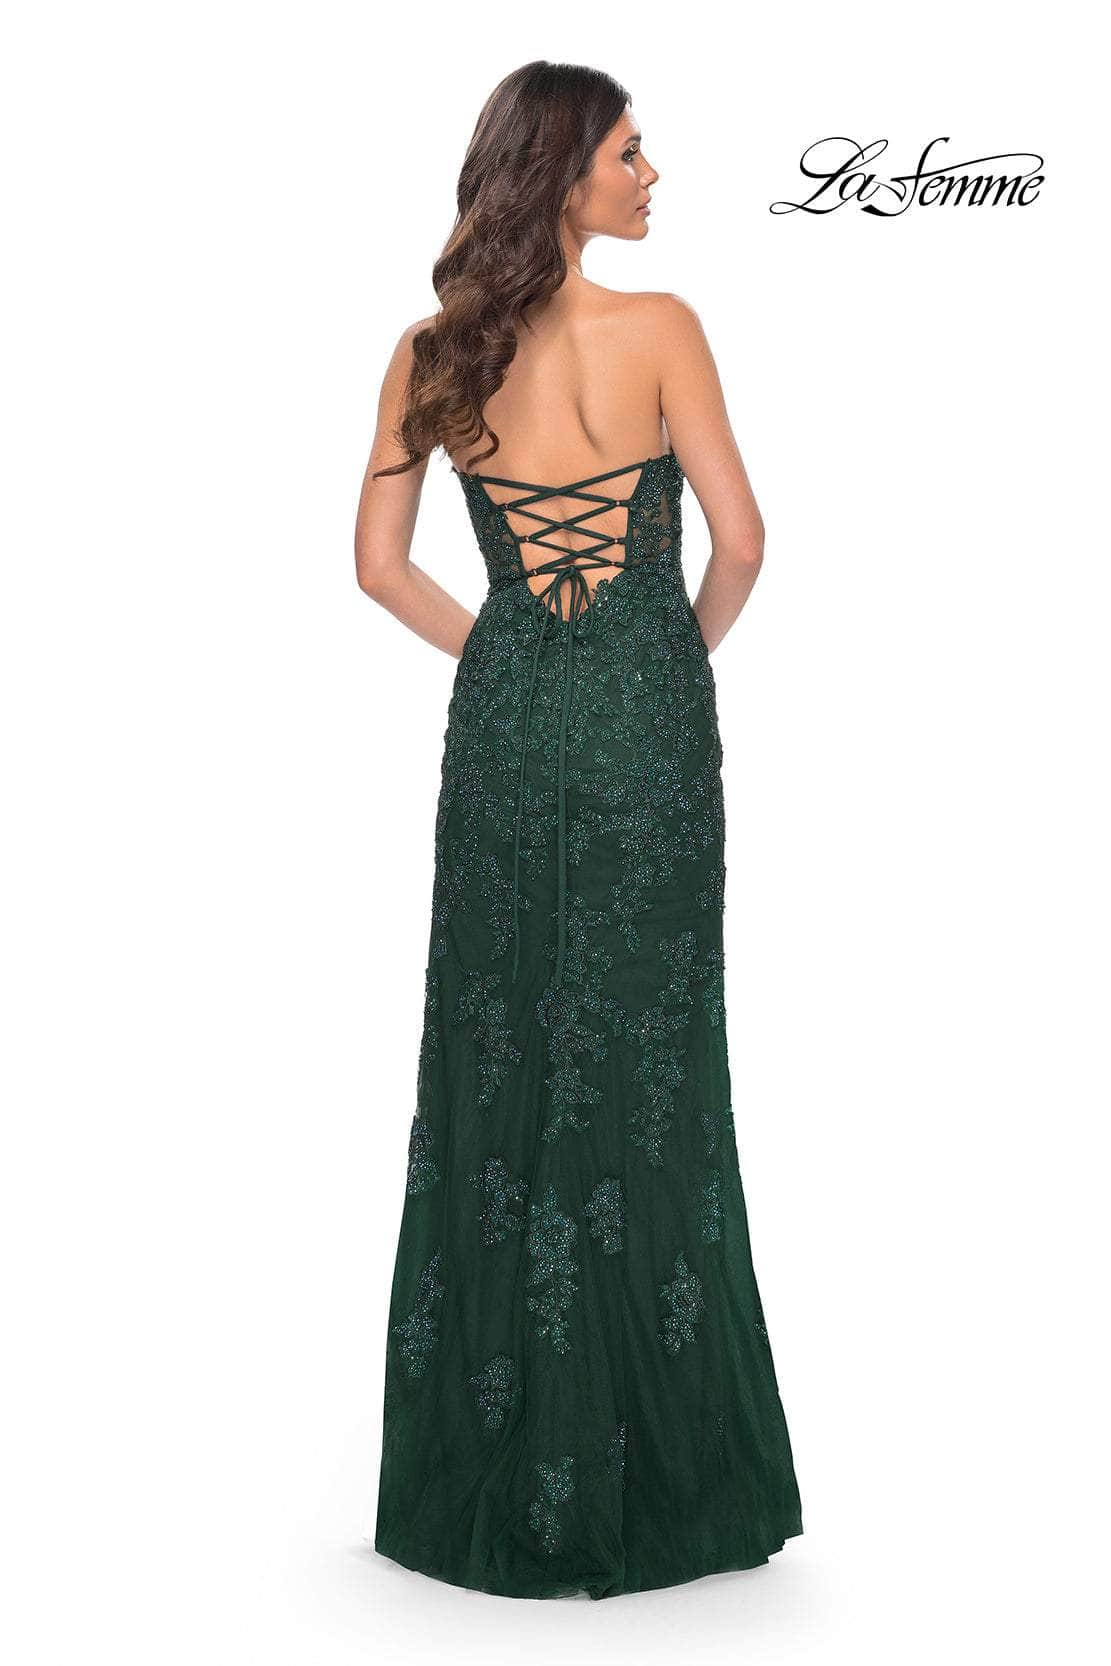 La Femme 32437 - Strapless Embroidered Prom Gown Special Occasion Dresses